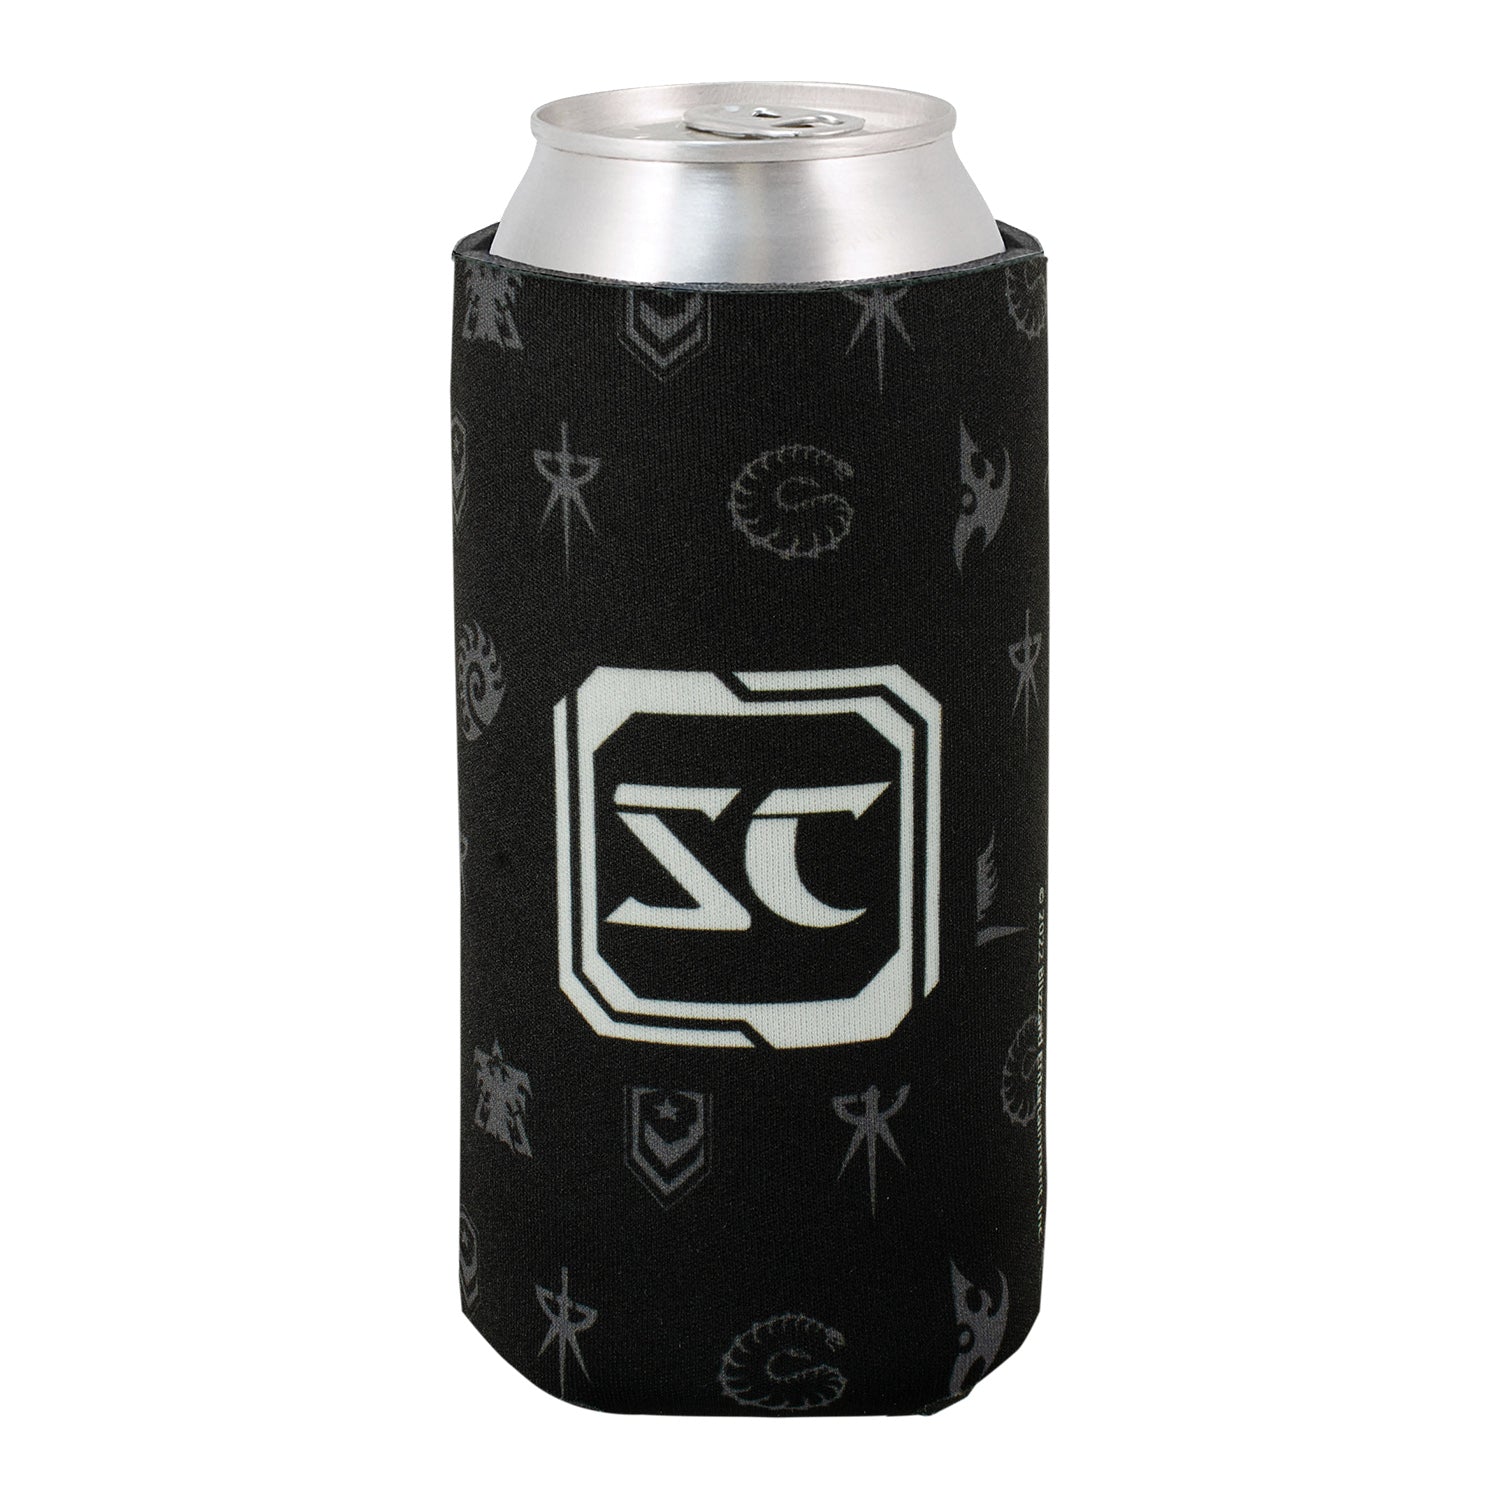 StarCraft 16oz Can Cooler - Front View